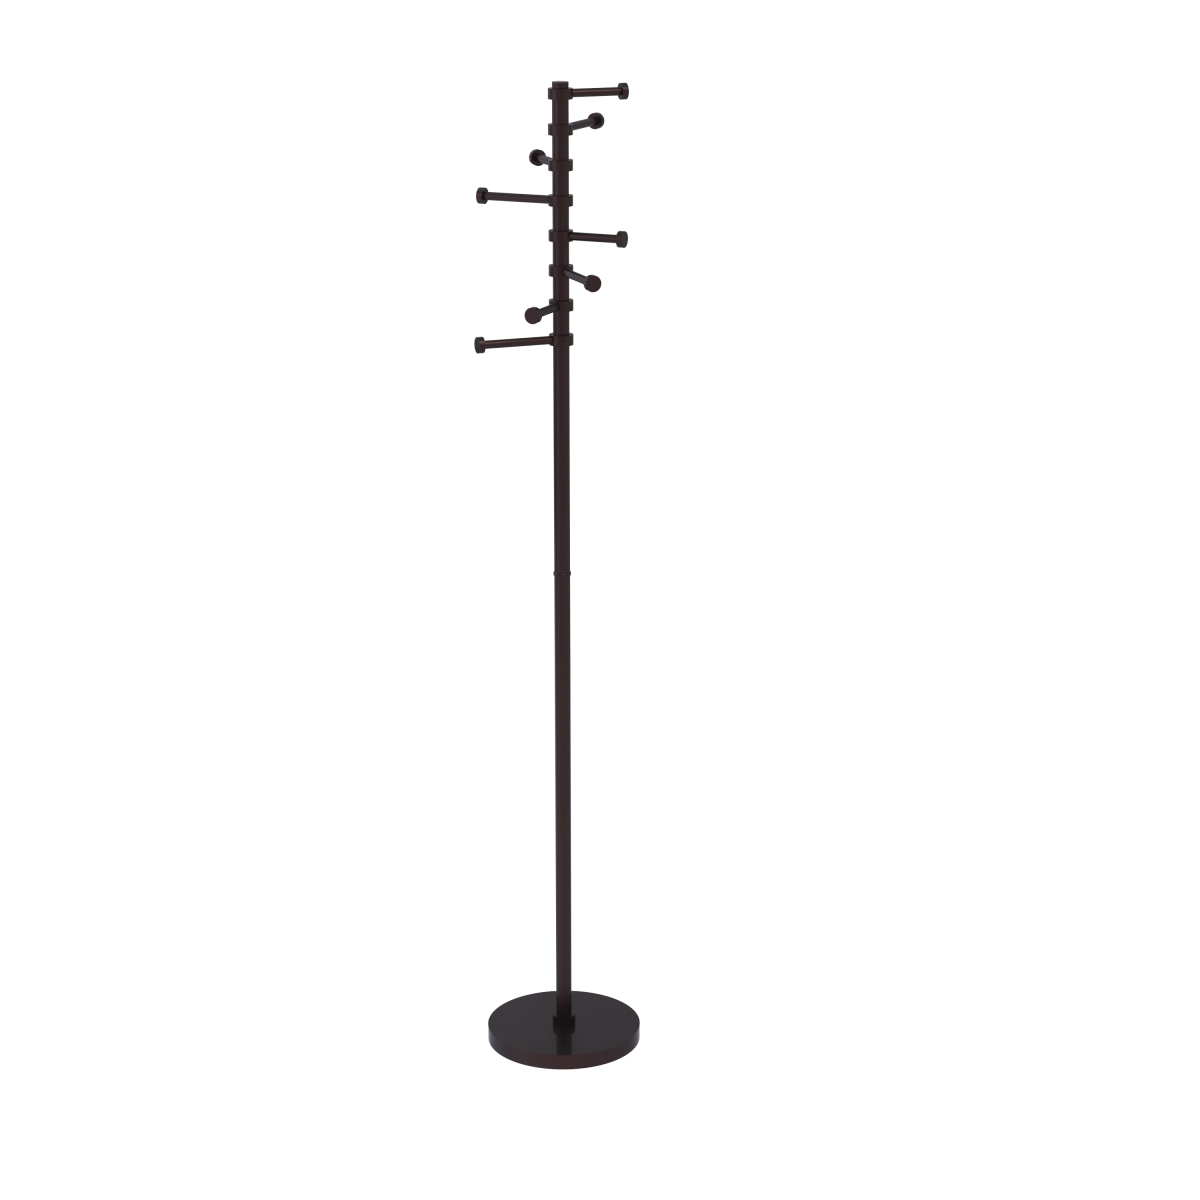 Picture of Allied Brass CS-1-ABZ Free Standing Coat Rack with Six Pivoting Pegs, Antique Bronze